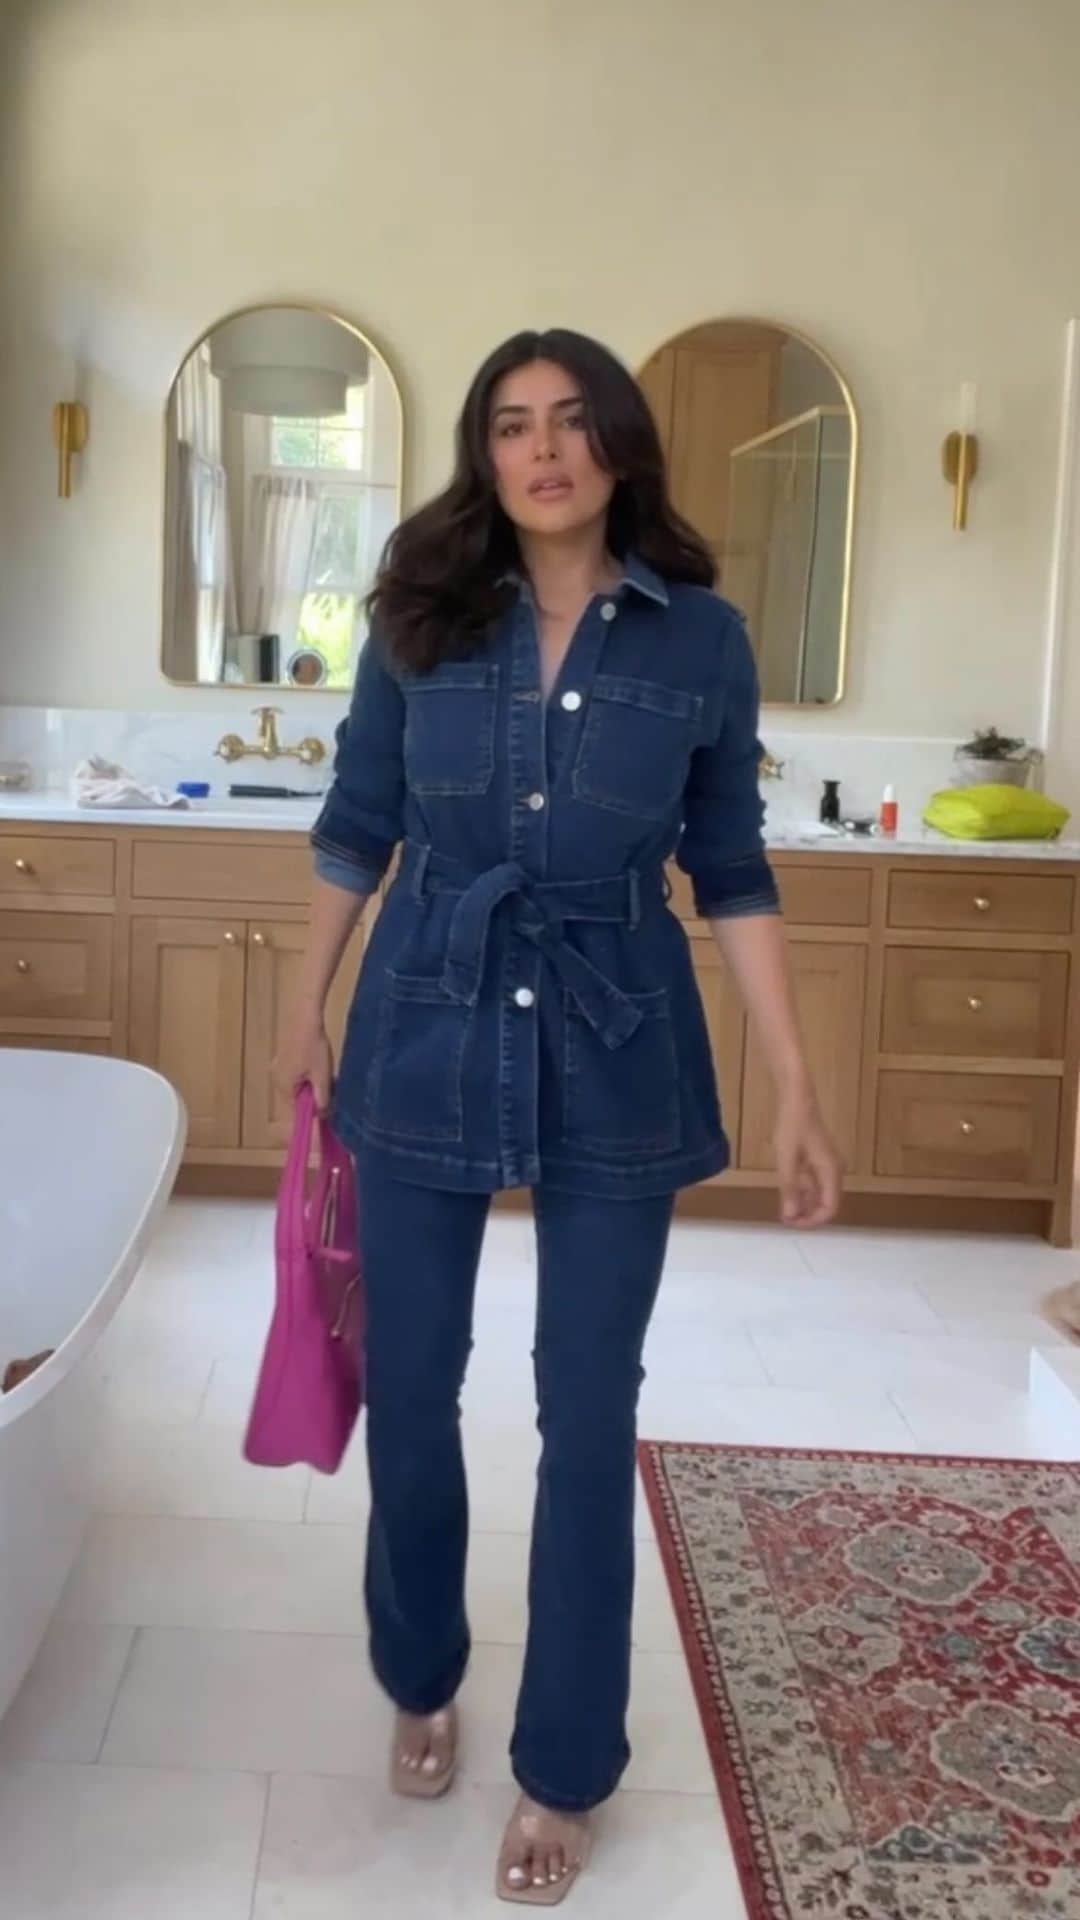 Sazan Hendrixのインスタグラム：「Emerging from the postpartum fog, and guess what? I’m back in JEANS! 💙 Slowly finding my style groove again with some sizing up and high-waisted stretch! Feeling comfy and confident in this head-to-toe outfit I picked out from @macys On 34th brand 🥰 Tell me, what’s your favorite clothing item that makes you feel amazing?!👇🏼 #sponsored #On34thStyle #Macys #macysstylecrew #postpartumbody」